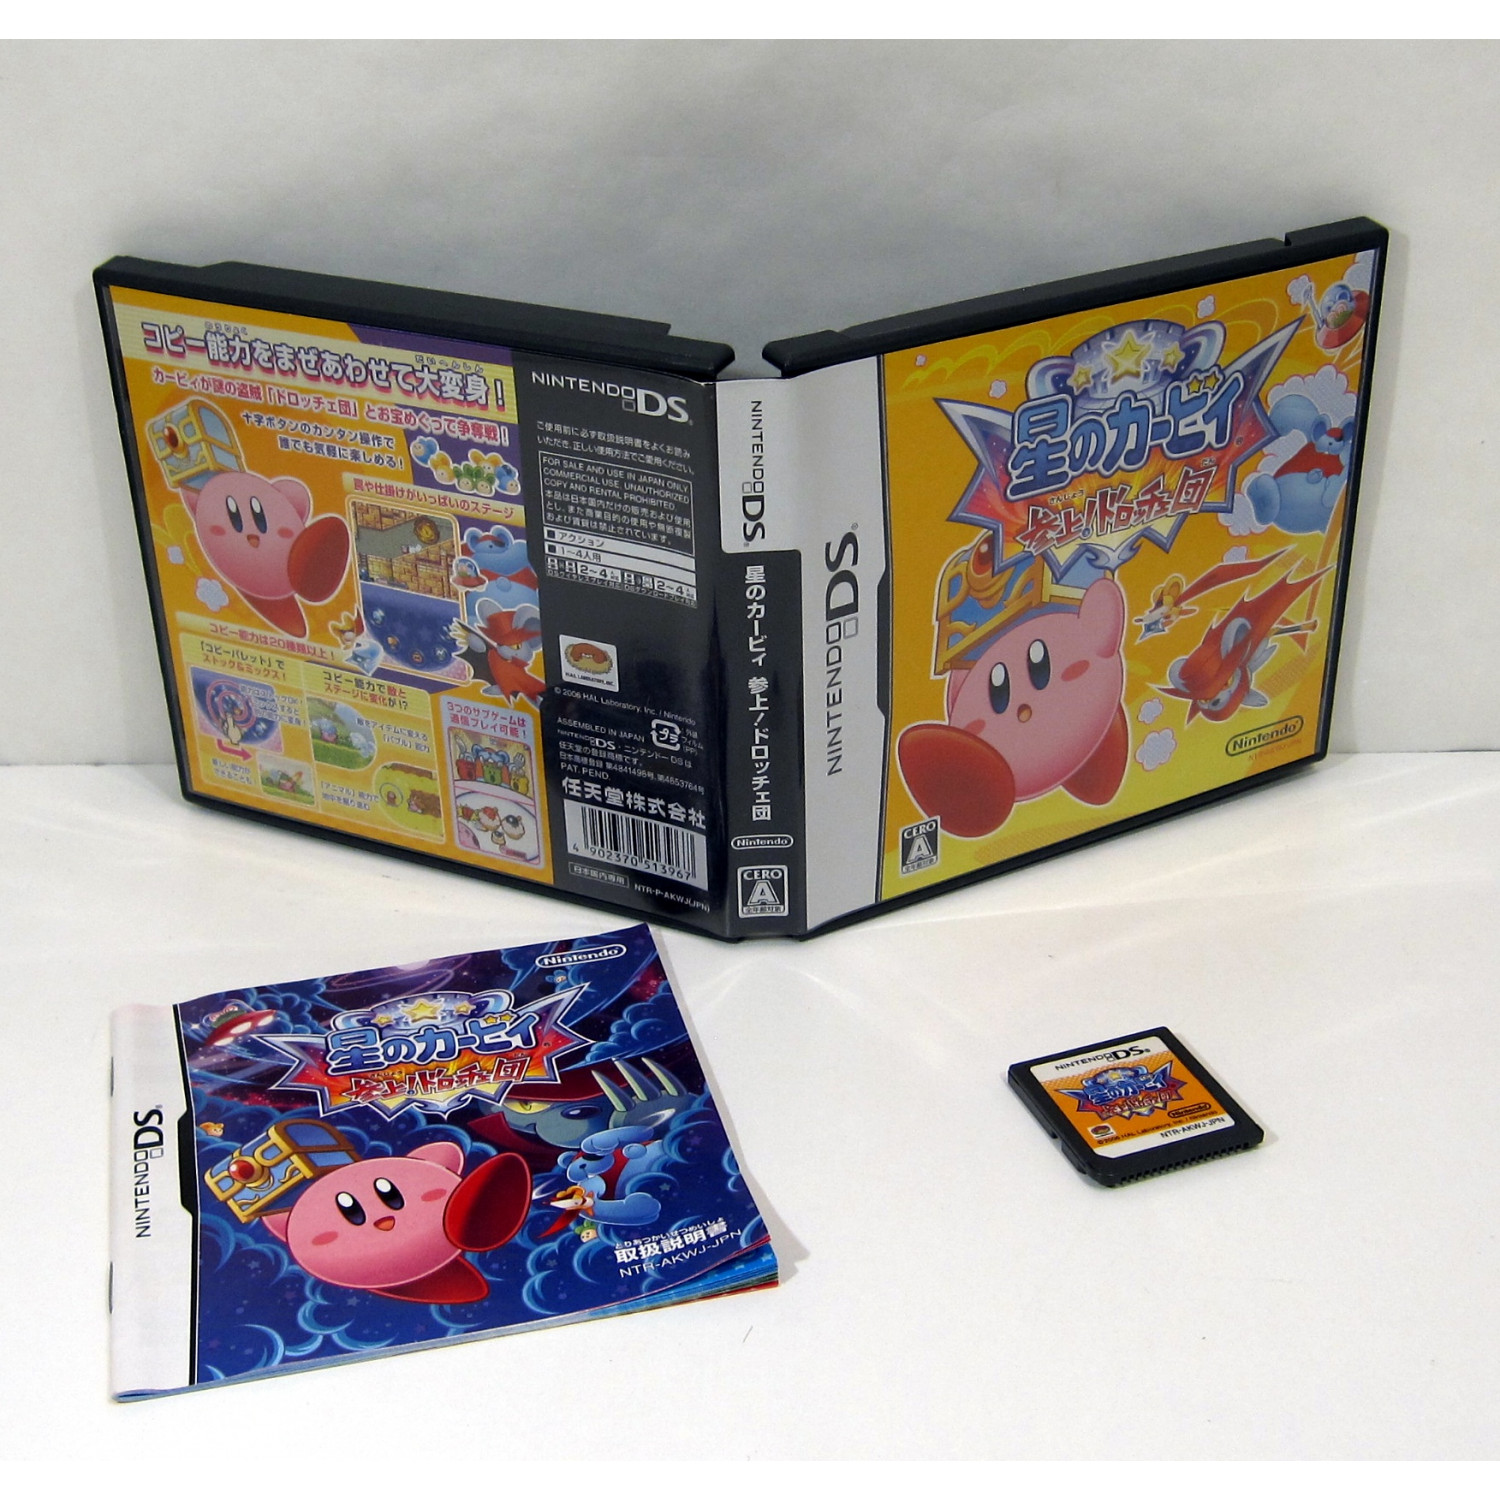 Kirby: Squeak Squad, NDS